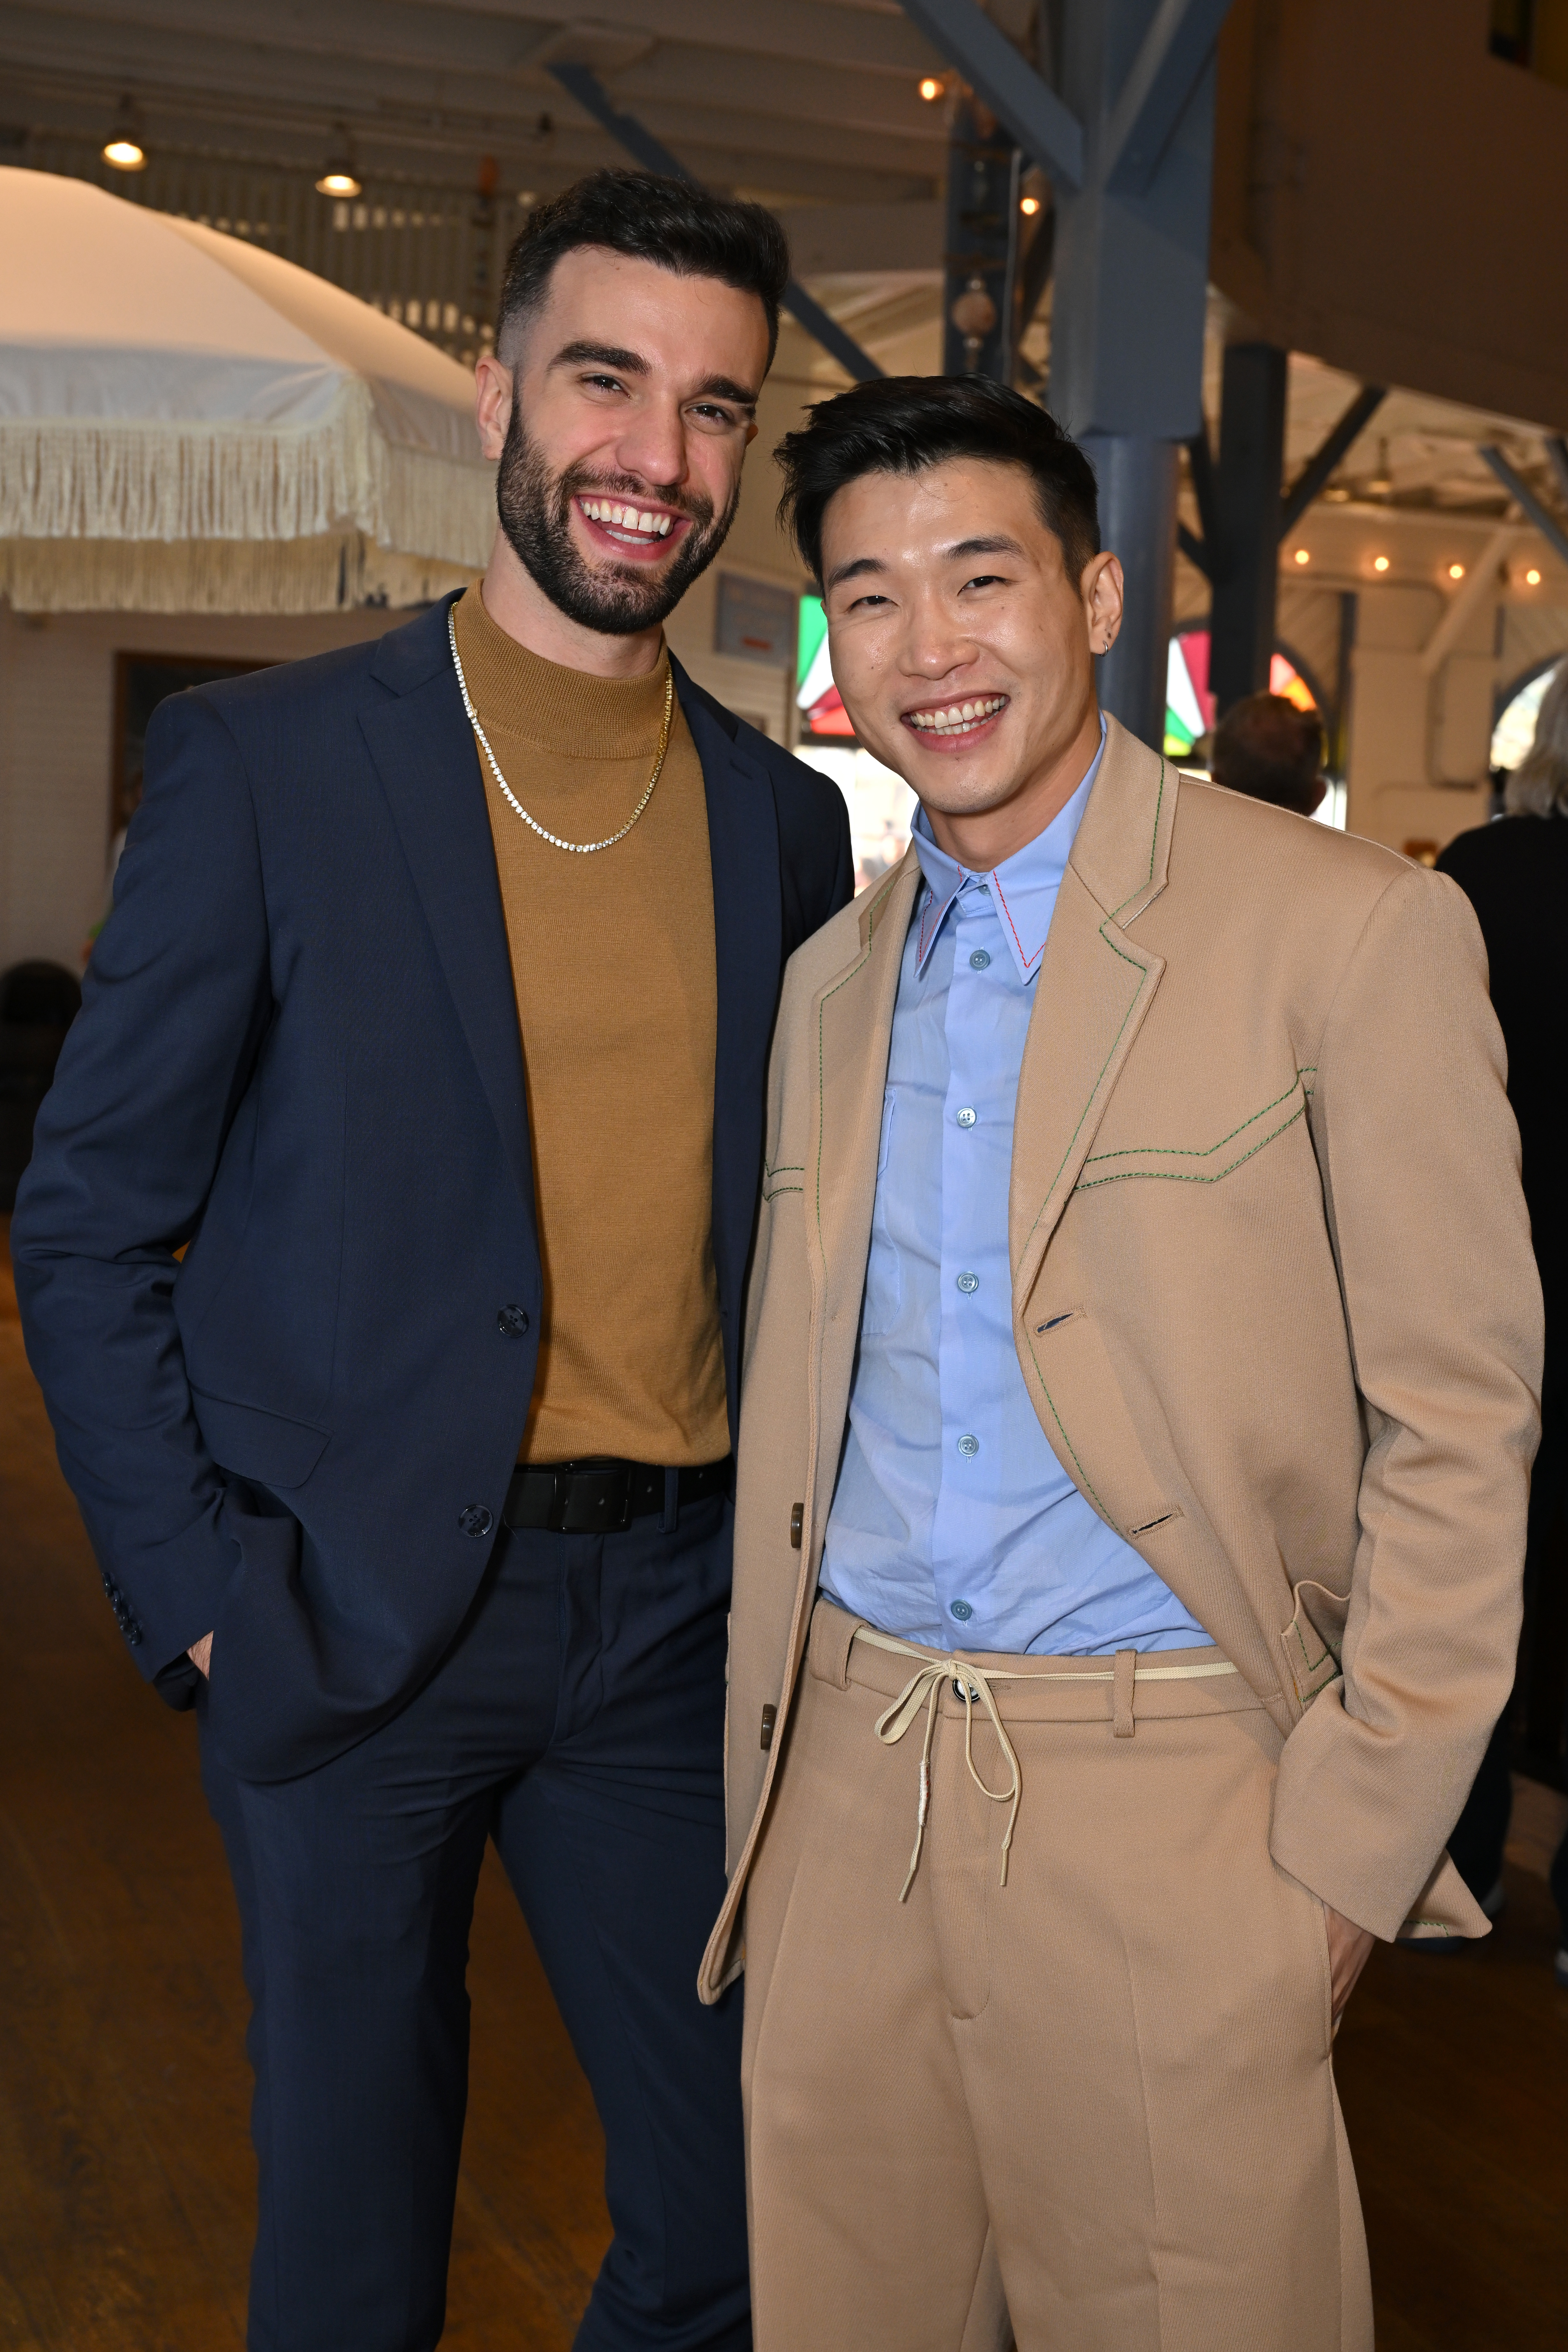 Joel Kim Booster and John-Michael Sudsina are pictured at the 2023 Film Independent Spirit Awards After Party at the Santa Monica Pier on March 4, 2023 in Santa Monica, California |  Source: Getty Images